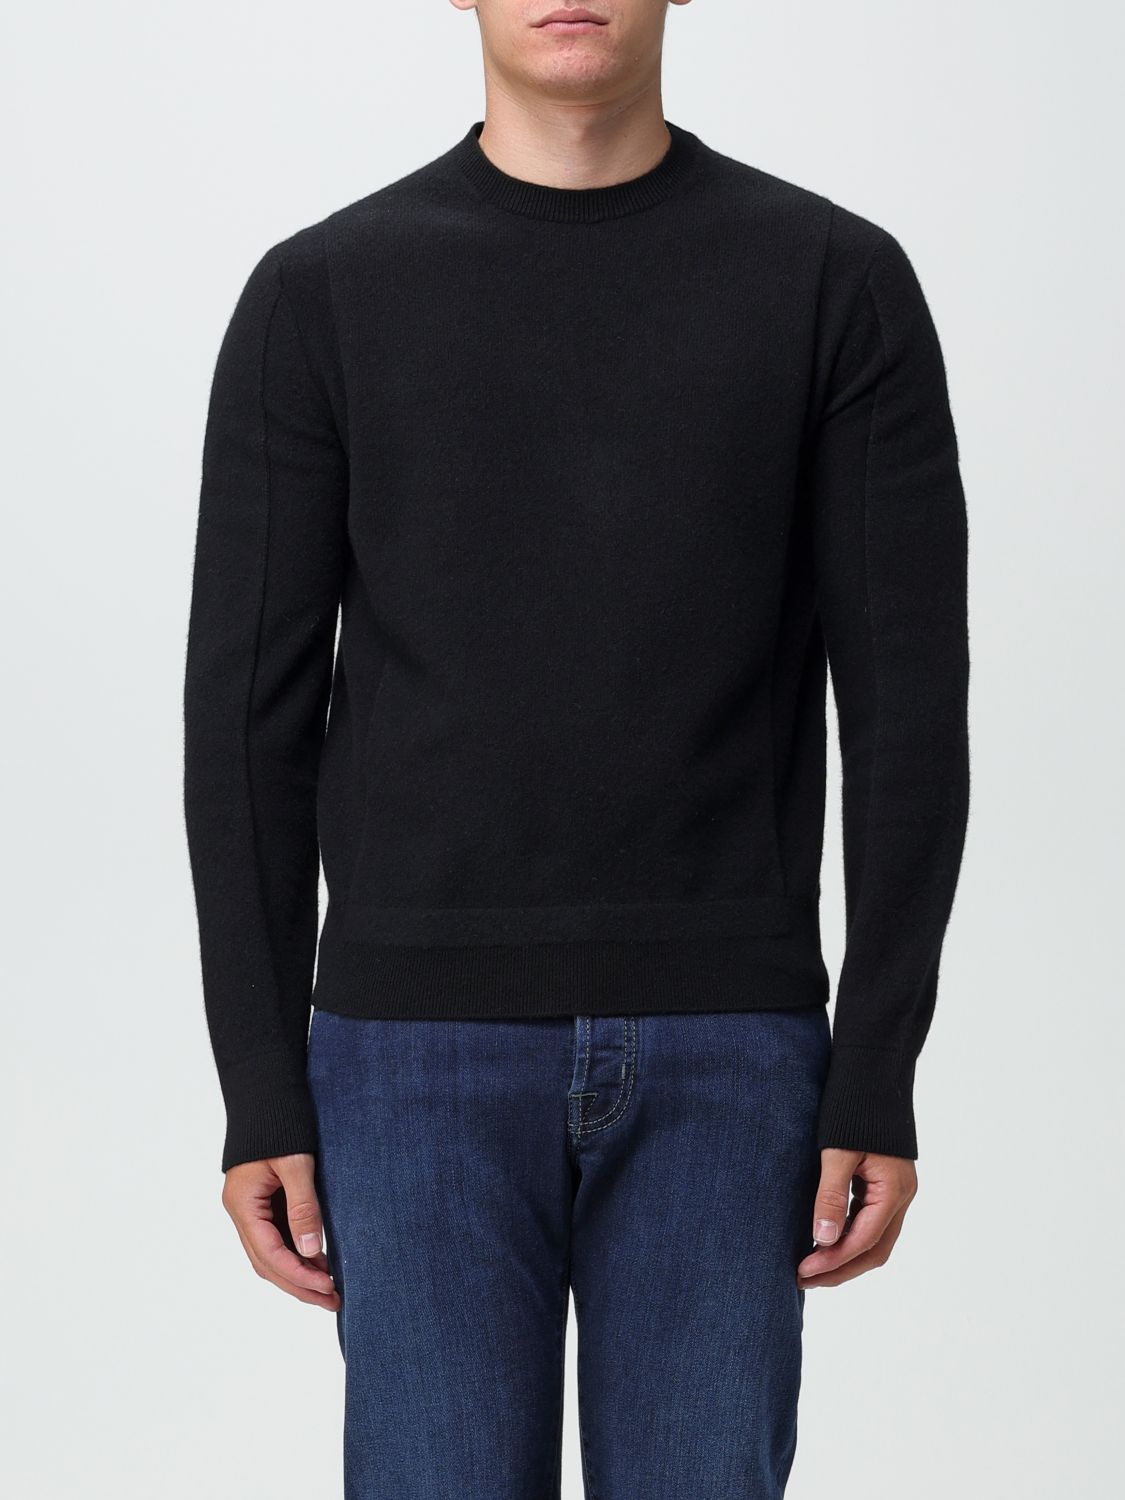 ZEGNA: sweater for man - Black | Zegna sweater UCB6MA6110 online at ...